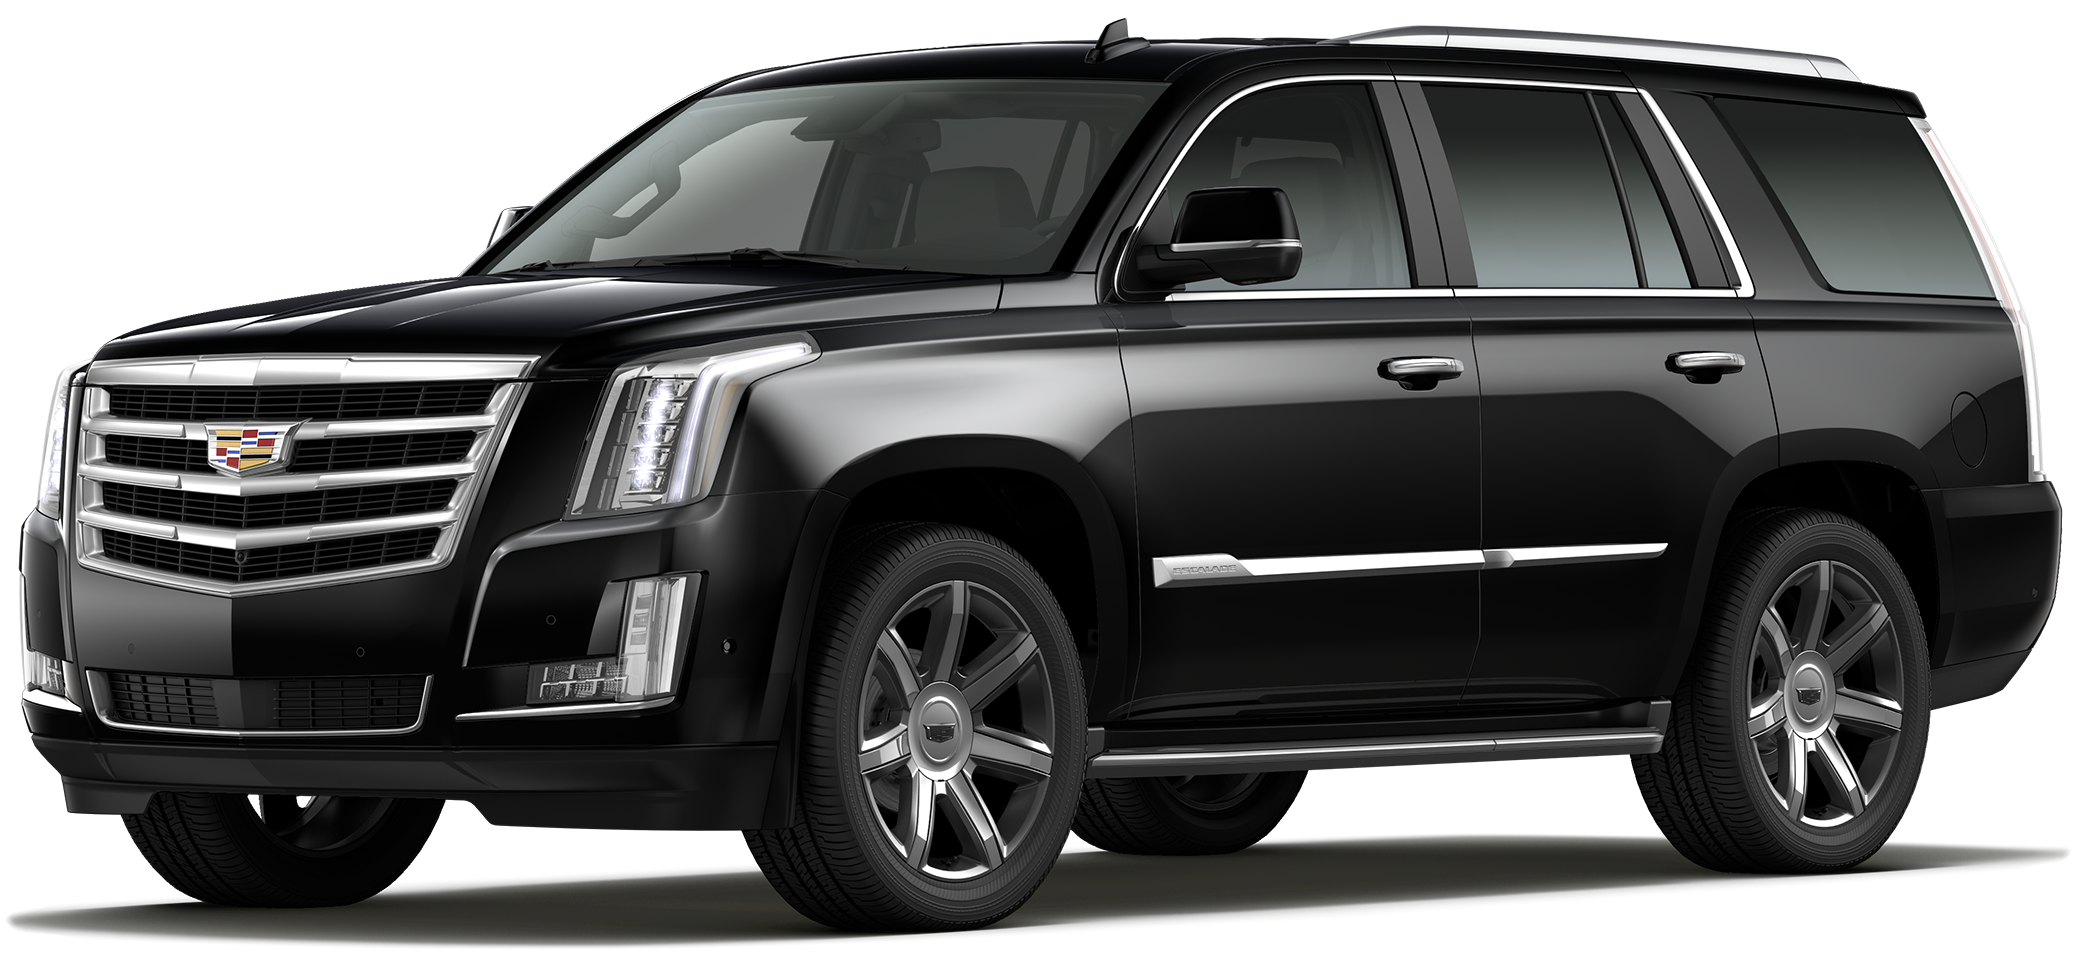 2020 CADILLAC Escalade Incentives, Specials & Offers in Wilkes-Barre PA